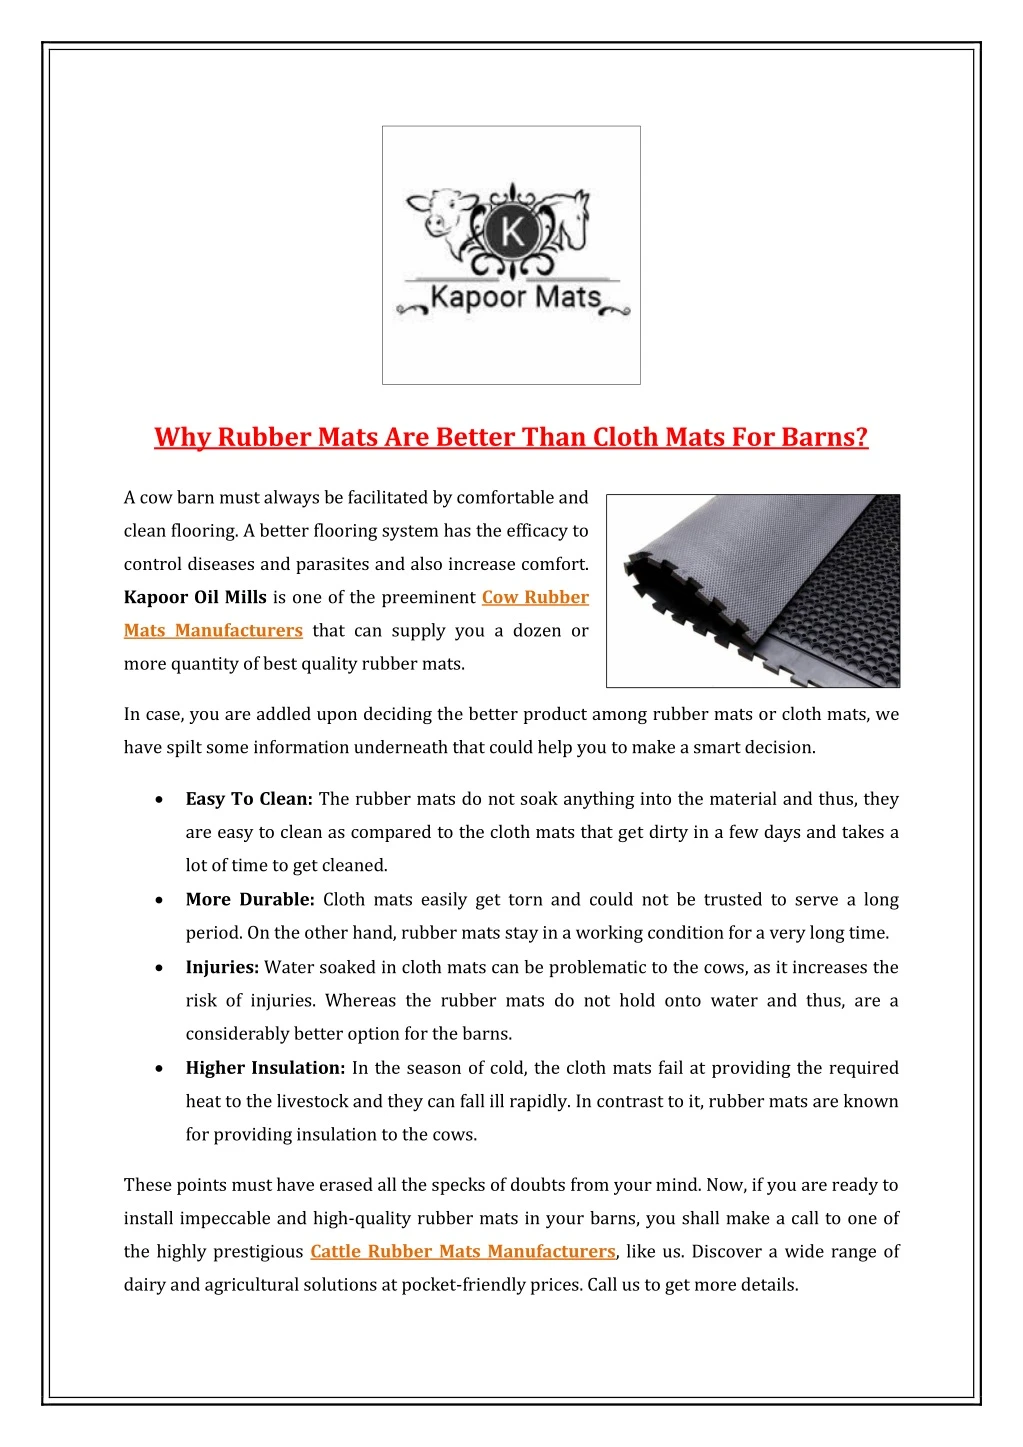 why rubber mats are better than cloth mats